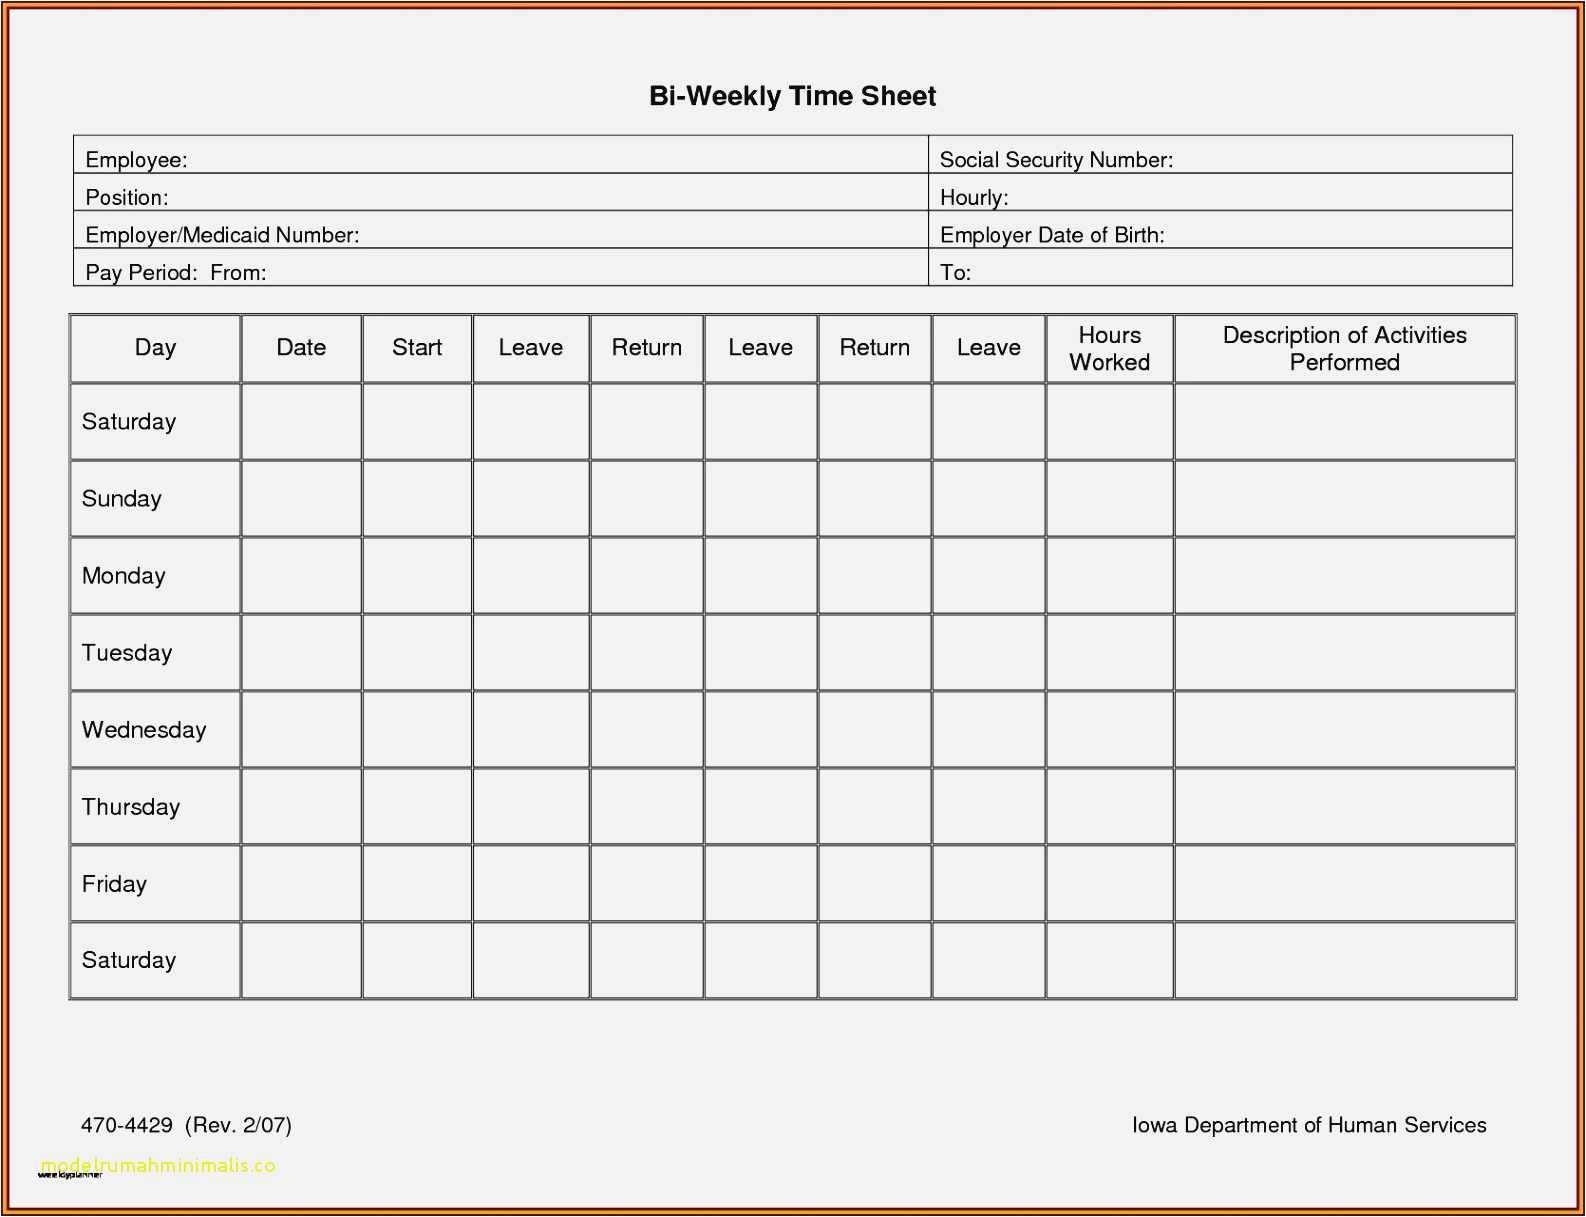 Daily Time Sheet Examples | Time Sheet Templates Pertaining To Weekly Time Card Template Free